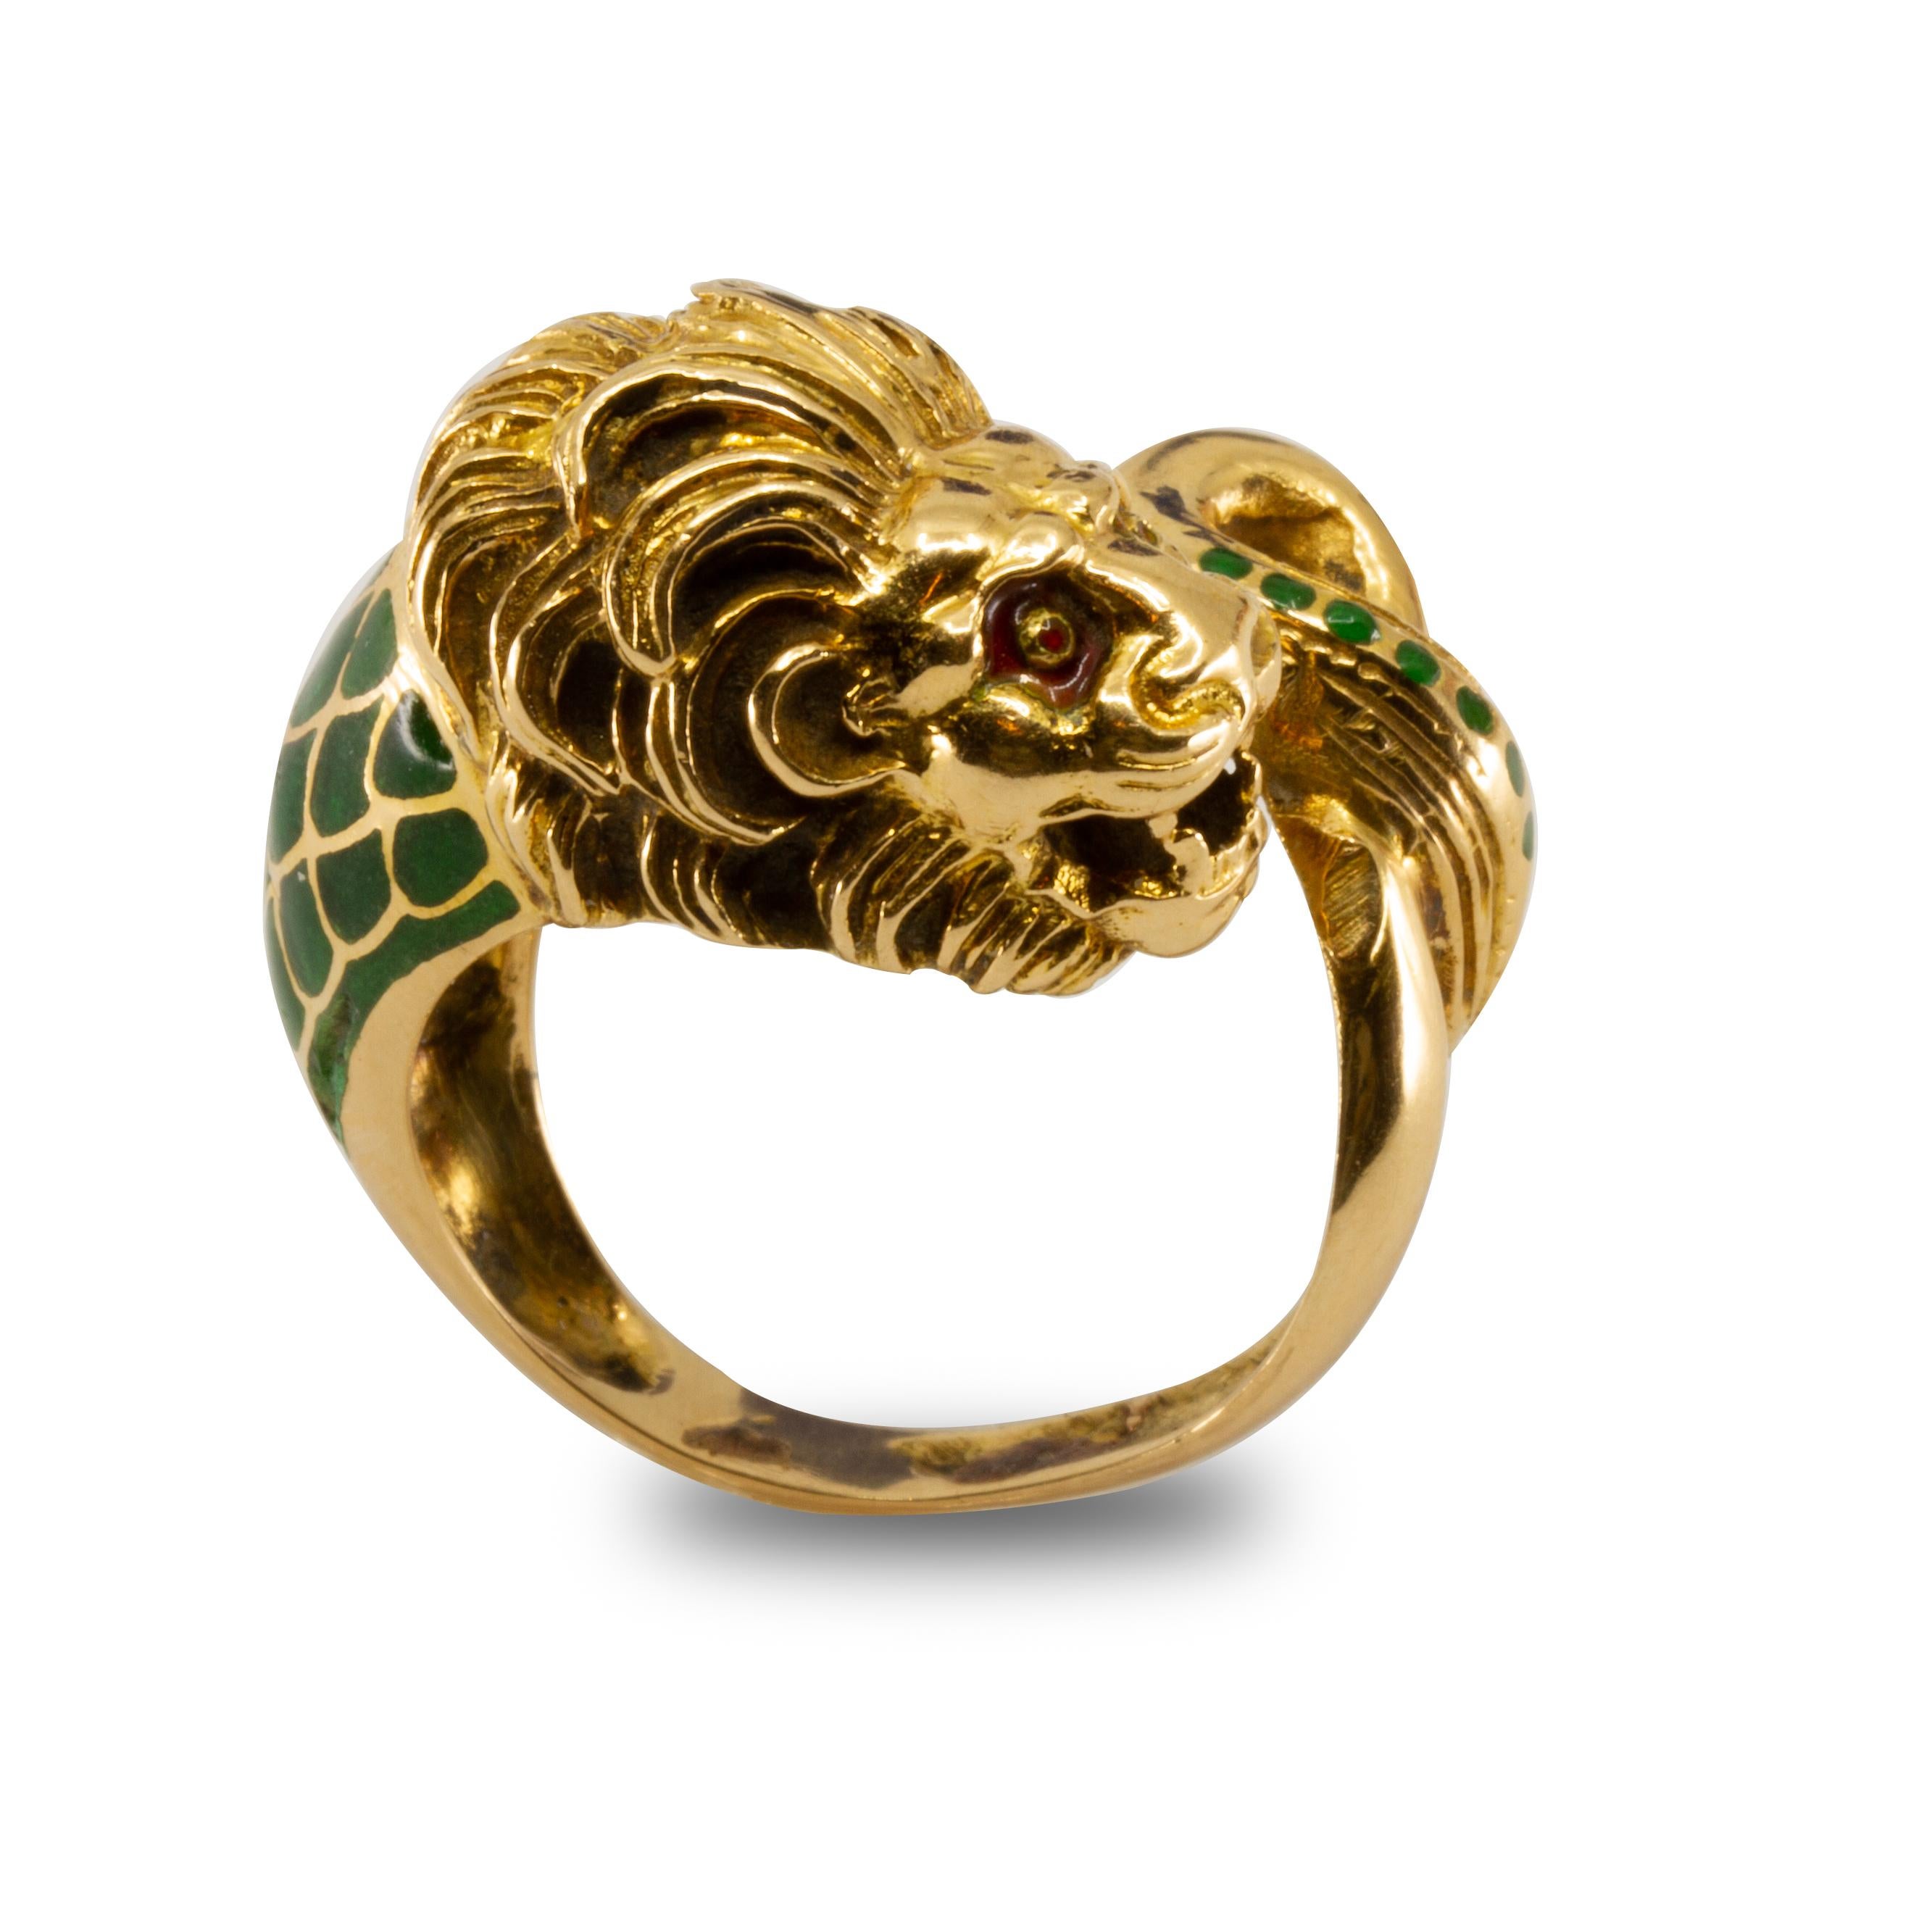 Offered is a beautiful vintage lion head ring made from 18K gold and green enamel as the mane and tail. We do not know who the maker is but we are sure it is Italian due to the style. It is a size 6.5